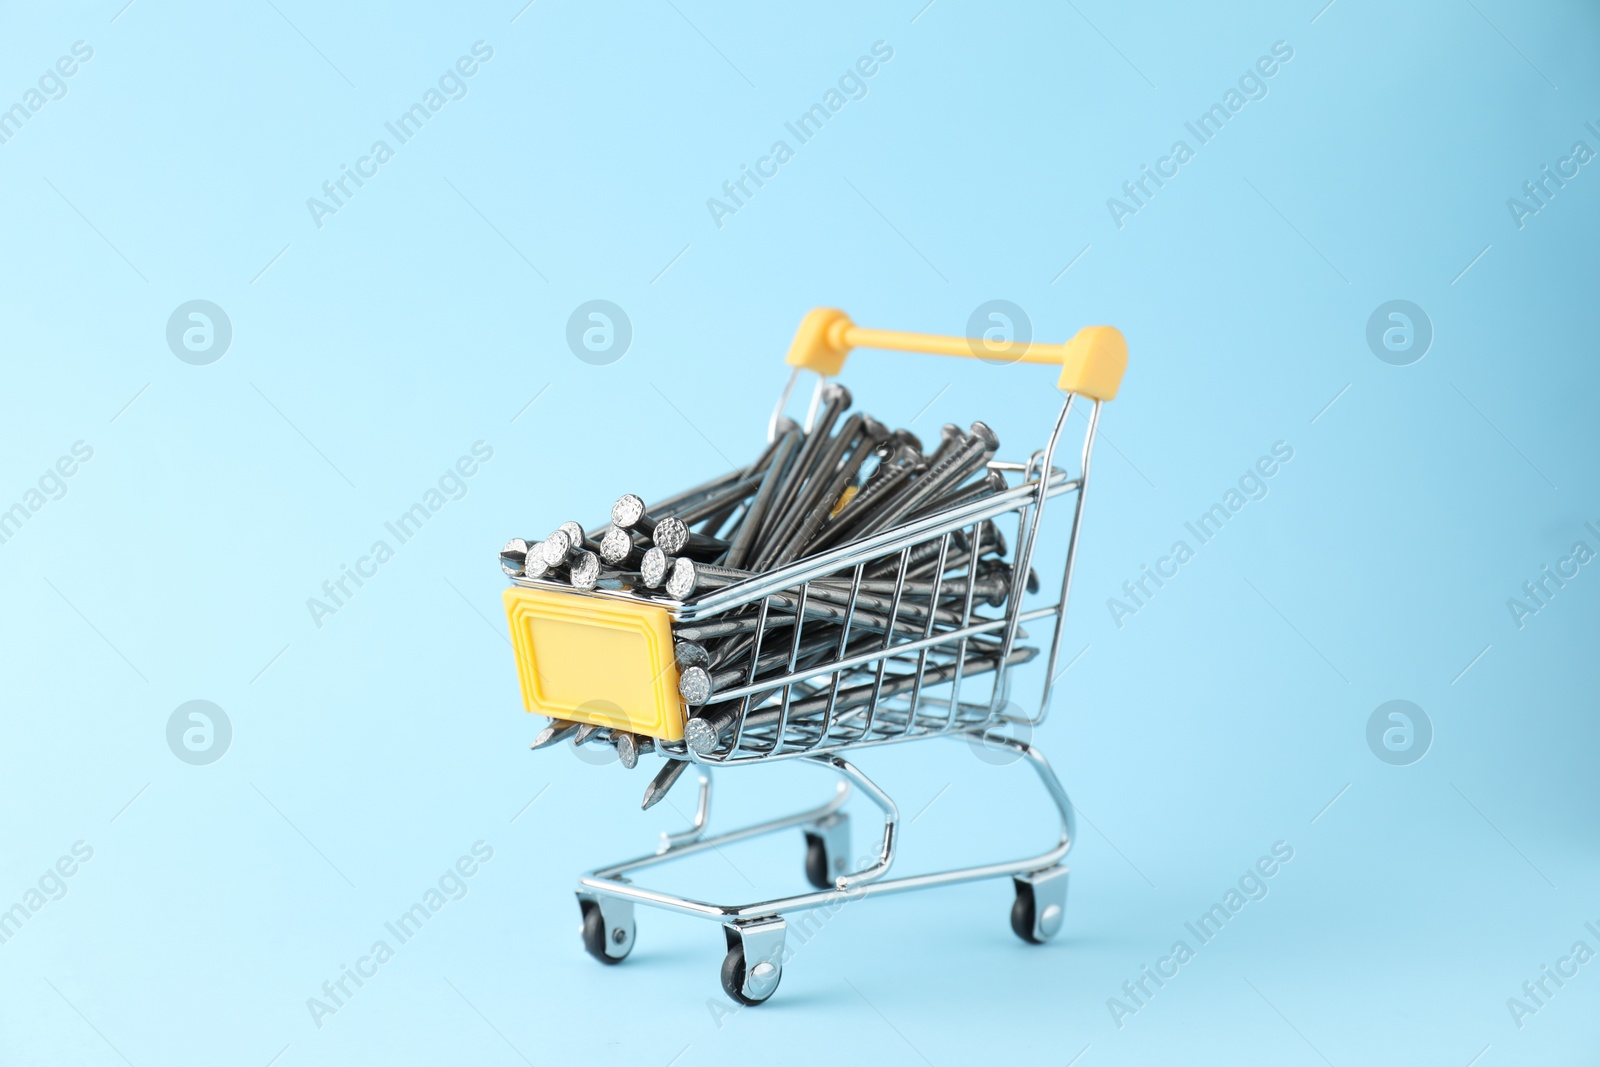 Photo of Metal nails in shopping cart on light blue background